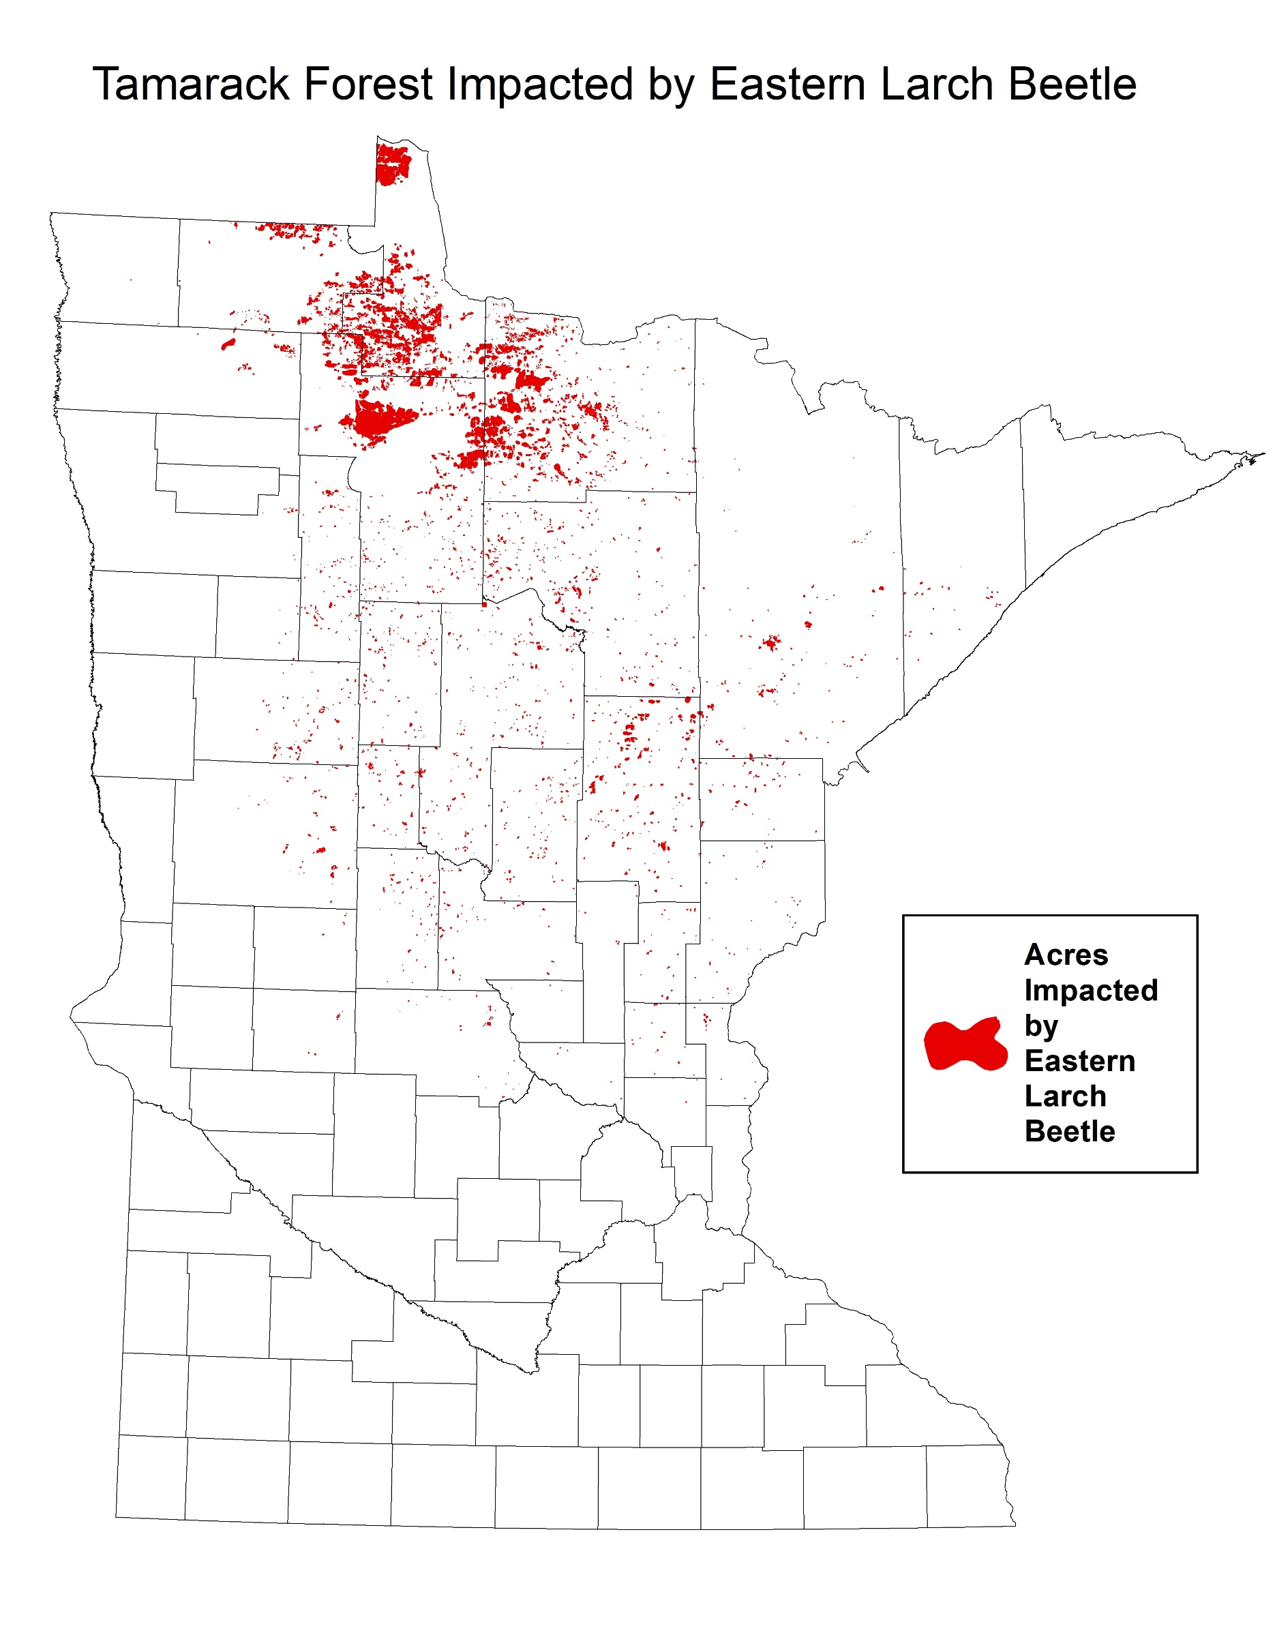 Spatial distribution of ELB damage in Minnesota.